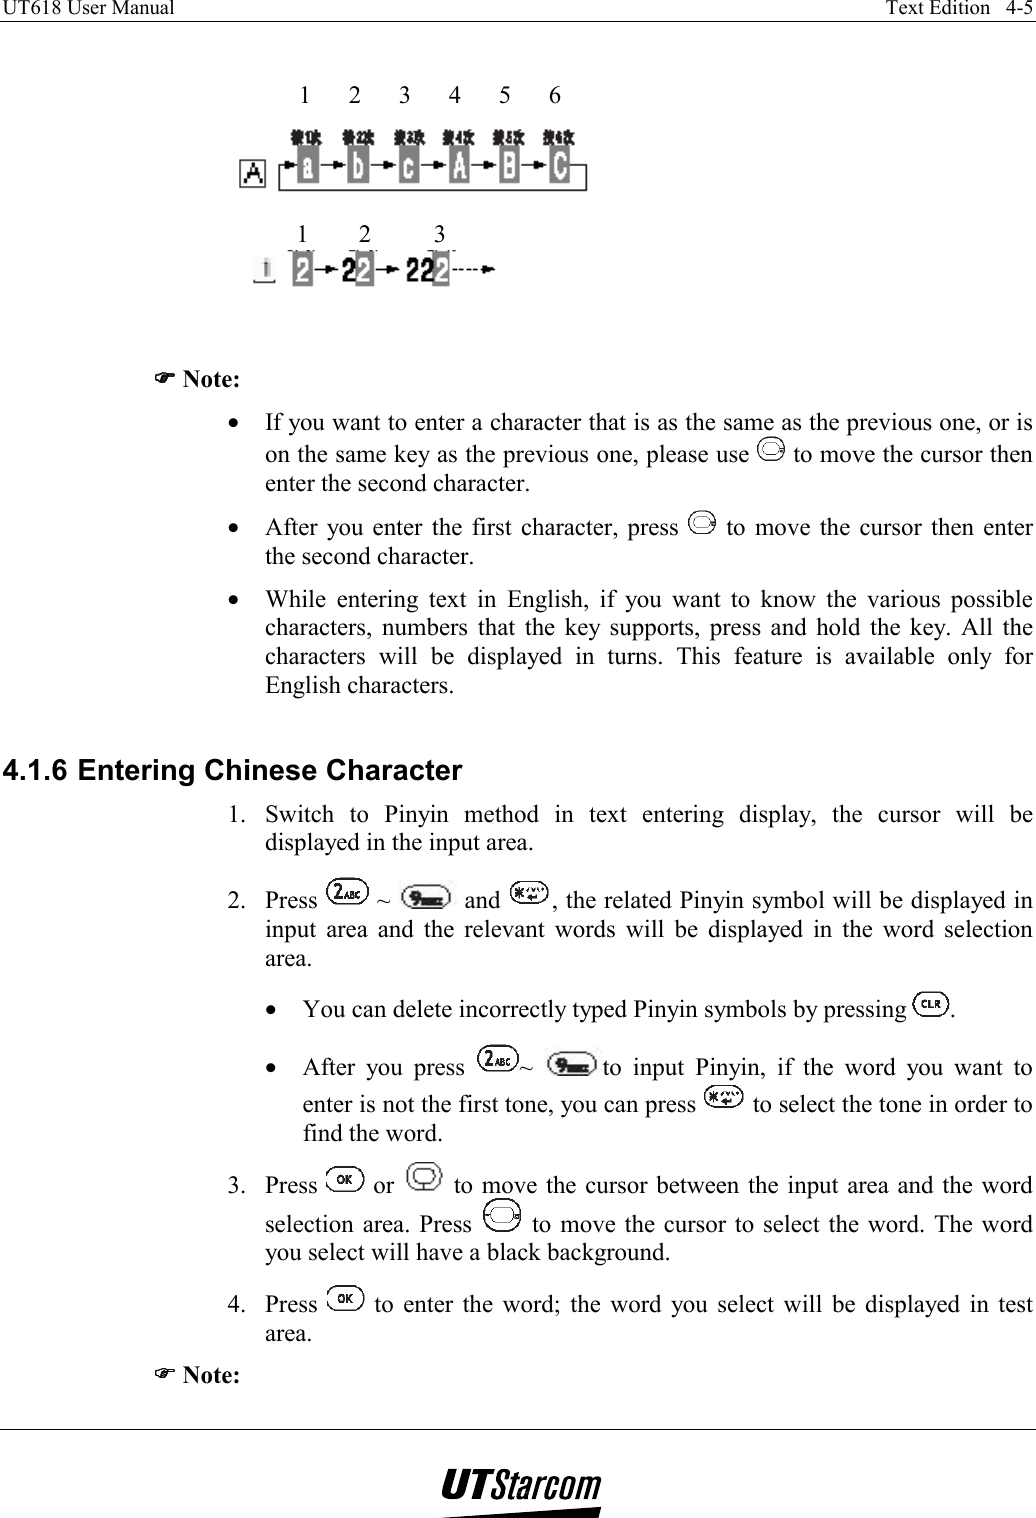 UT618 User Manual    Text Edition   4-5        )))) Note: •  If you want to enter a character that is as the same as the previous one, or is on the same key as the previous one, please use   to move the cursor then enter the second character. •  After you enter the first character, press   to move the cursor then enter the second character. •  While entering text in English, if you want to know the various possible characters, numbers that the key supports, press and hold the key. All the characters will be displayed in turns. This feature is available only for English characters.  4.1.6 Entering Chinese Character 1.  Switch to Pinyin method in text entering display, the cursor will be displayed in the input area. 2. Press   ~   and  , the related Pinyin symbol will be displayed in input area and the relevant words will be displayed in the word selection area. •  You can delete incorrectly typed Pinyin symbols by pressing  . •  After you press  ~  to input Pinyin, if the word you want to enter is not the first tone, you can press   to select the tone in order to find the word. 3. Press   or   to move the cursor between the input area and the word selection area. Press   to move the cursor to select the word. The word you select will have a black background. 4. Press   to enter the word; the word you select will be displayed in test area. )))) Note: 12345612 3